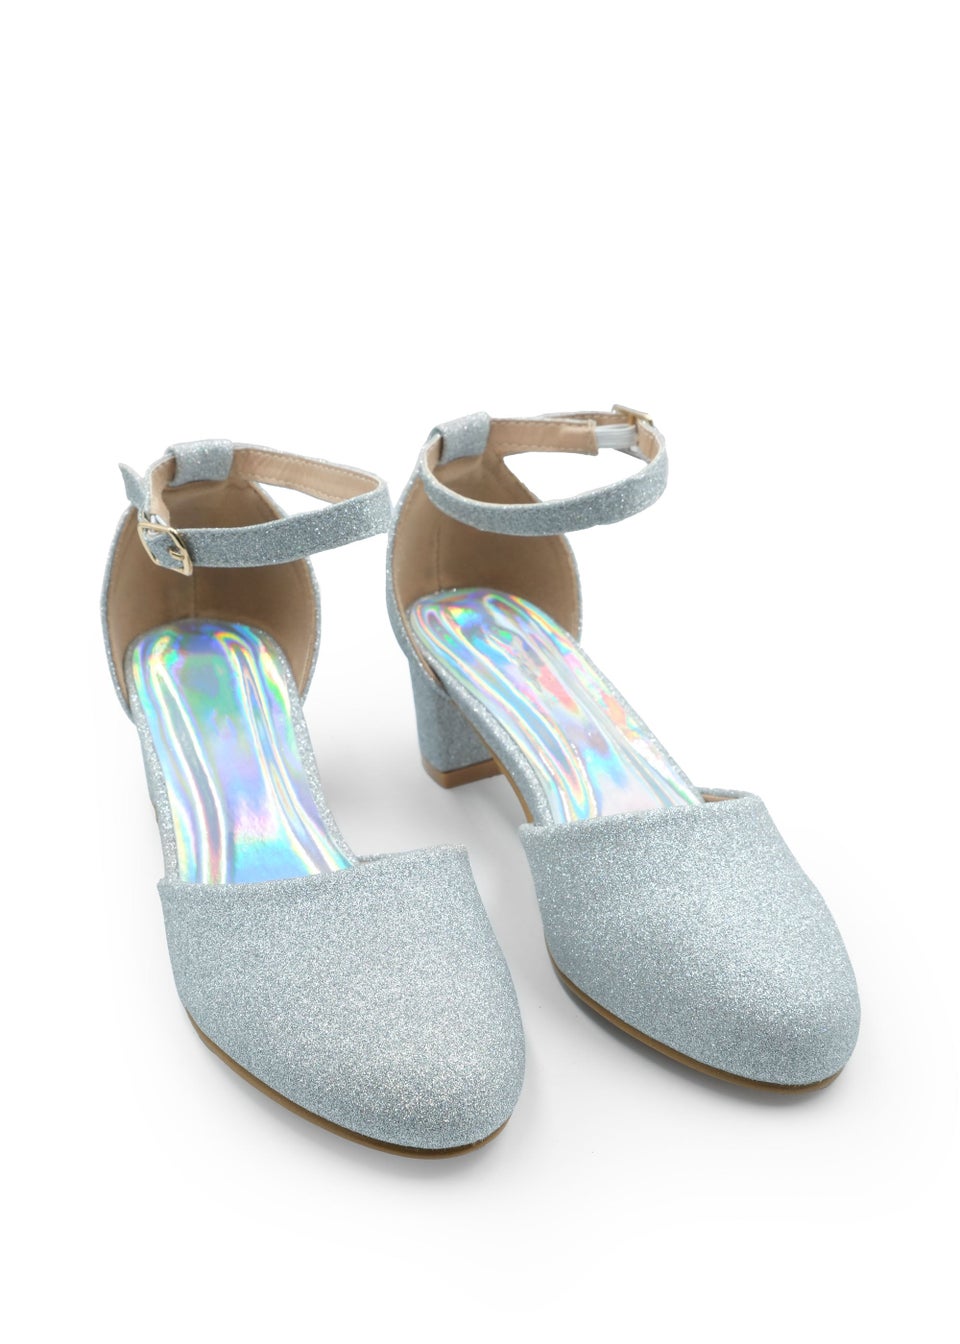 Where's That From Silver Glitter Abena Kids Mid Heel Sandals